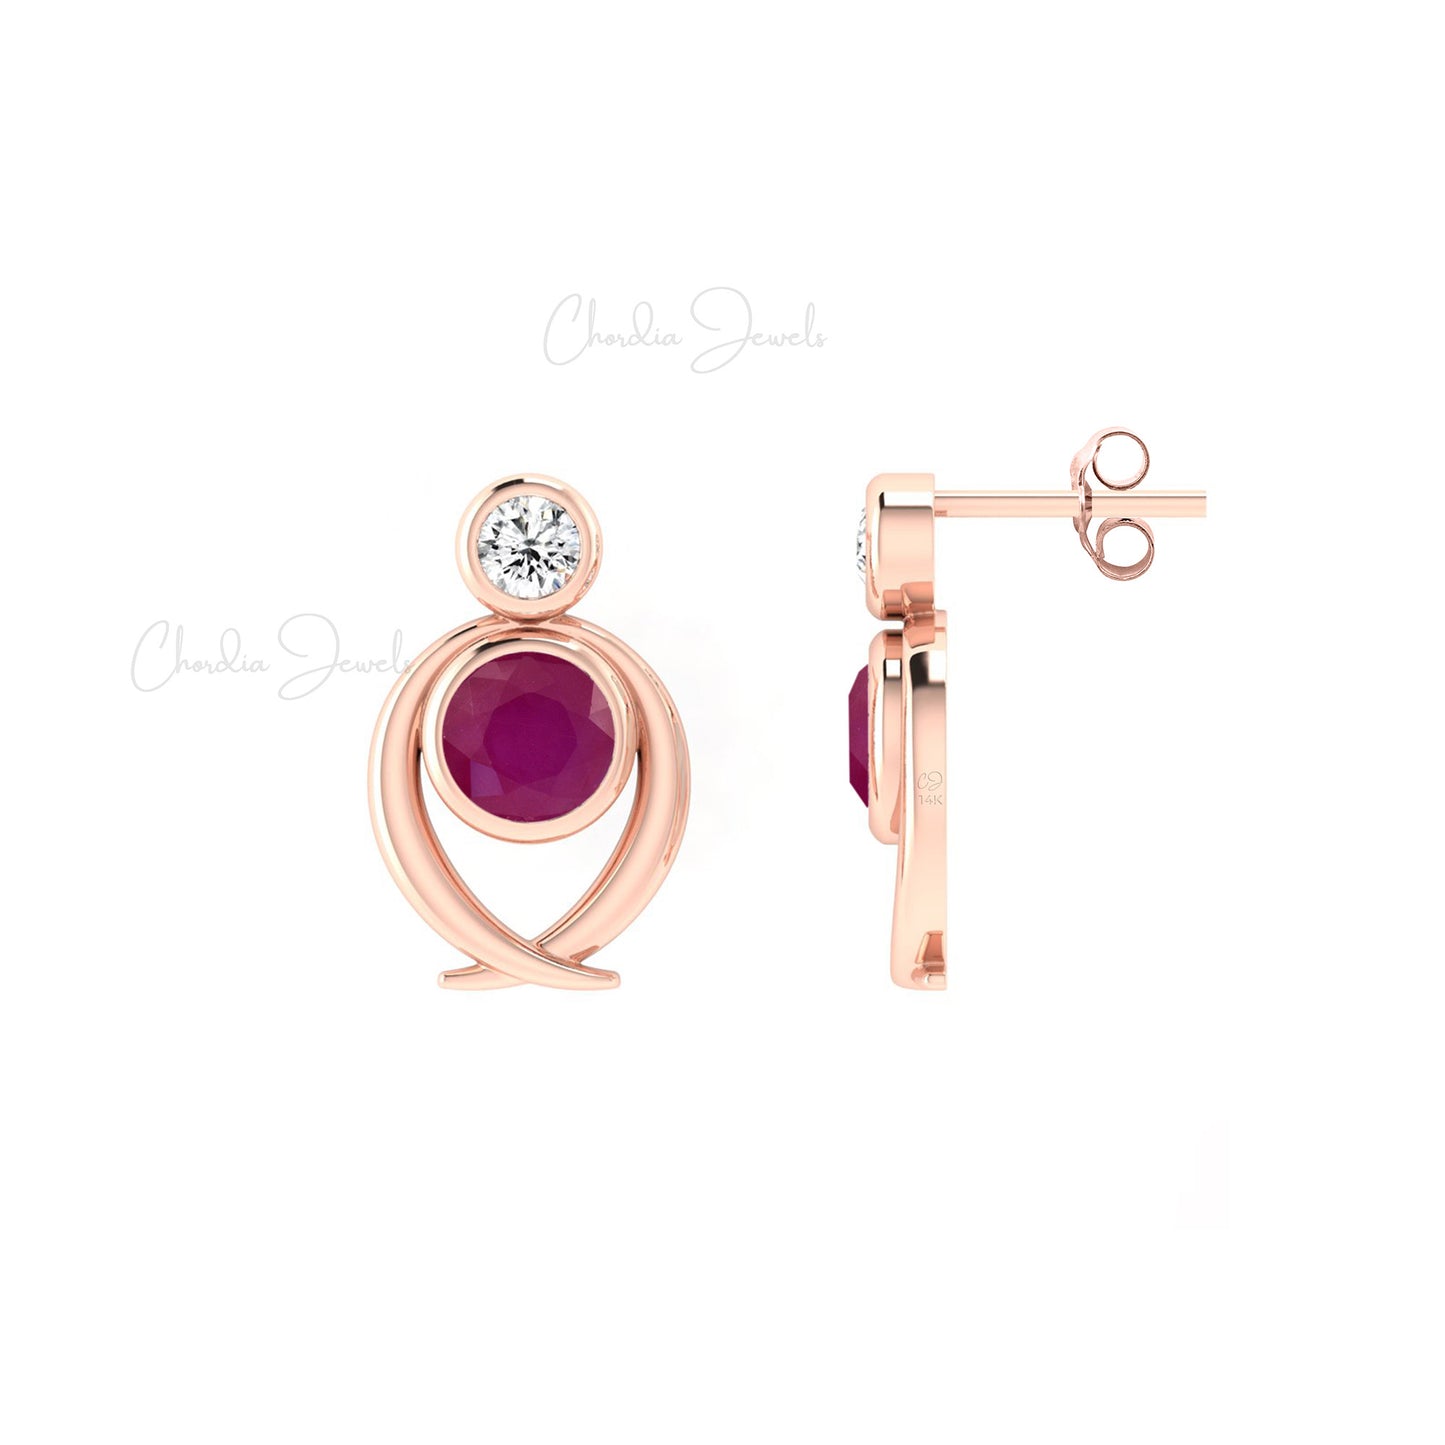 Genuine 5mm Round Cut Ruby Diamond Accented Studs Earrings in 14k Gold